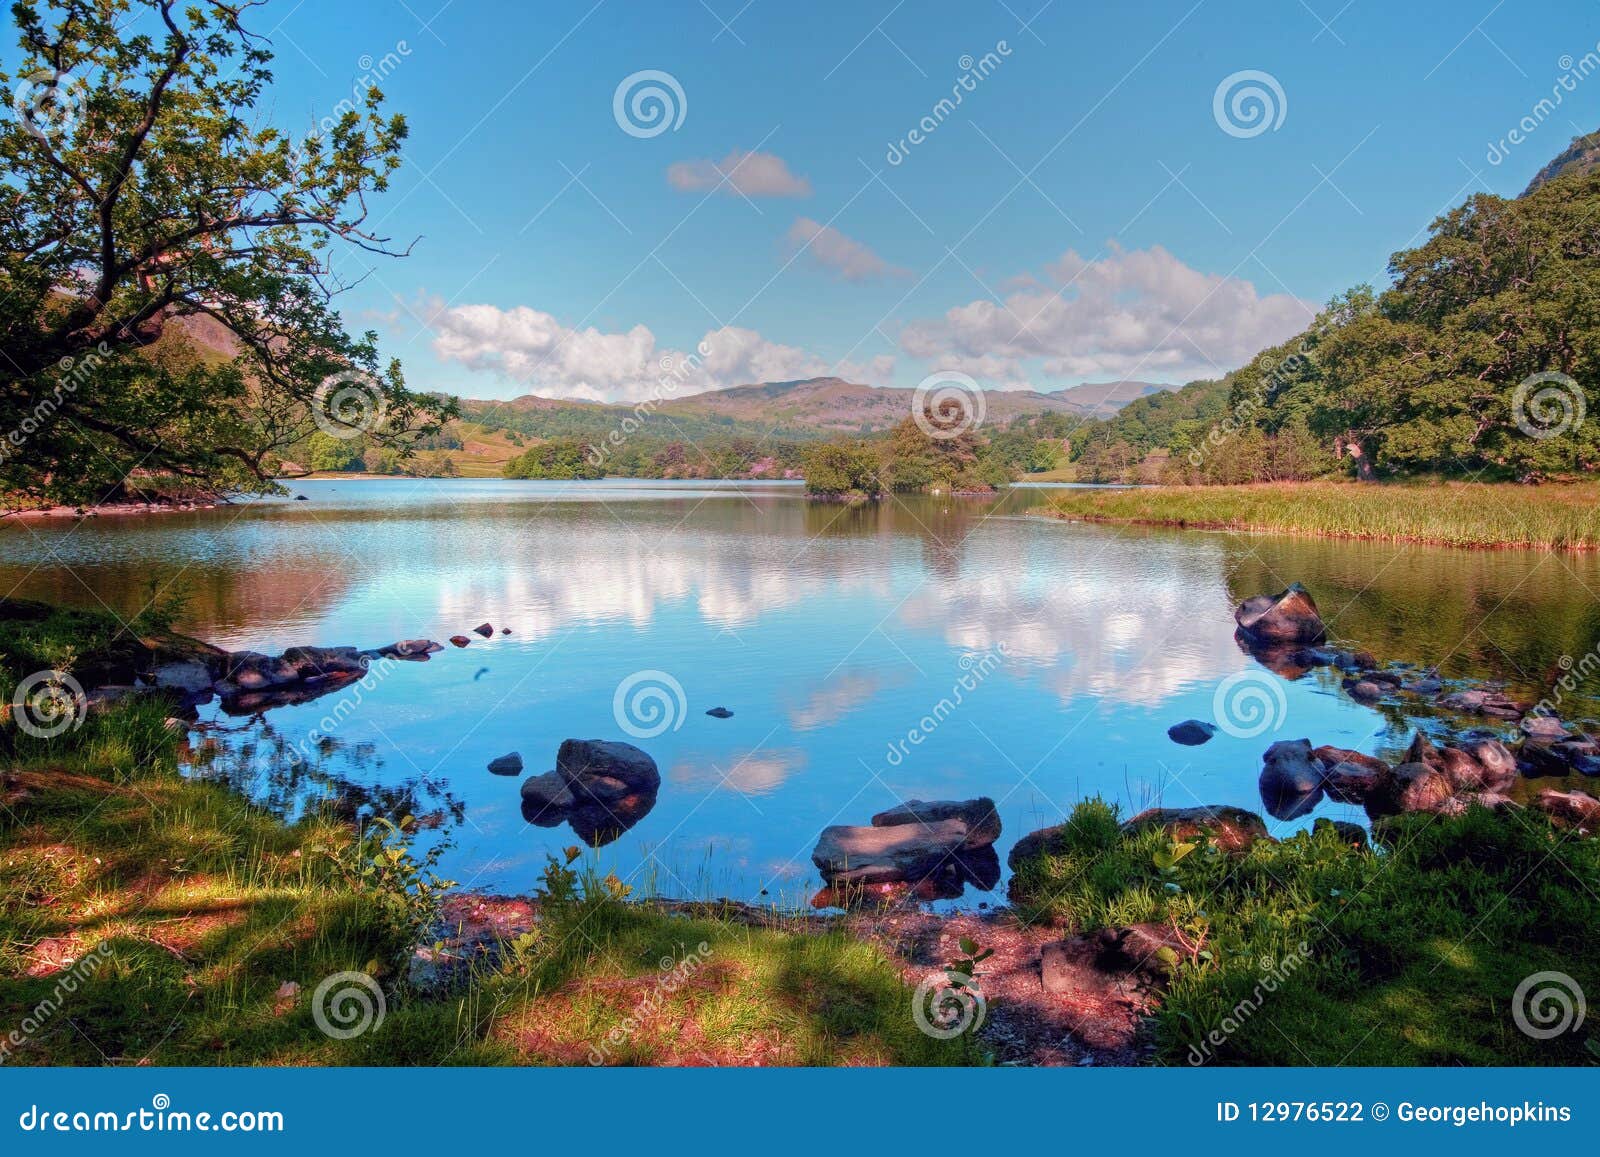 Rydal Water in Summer stock photo. Image of waterscene - 12976522